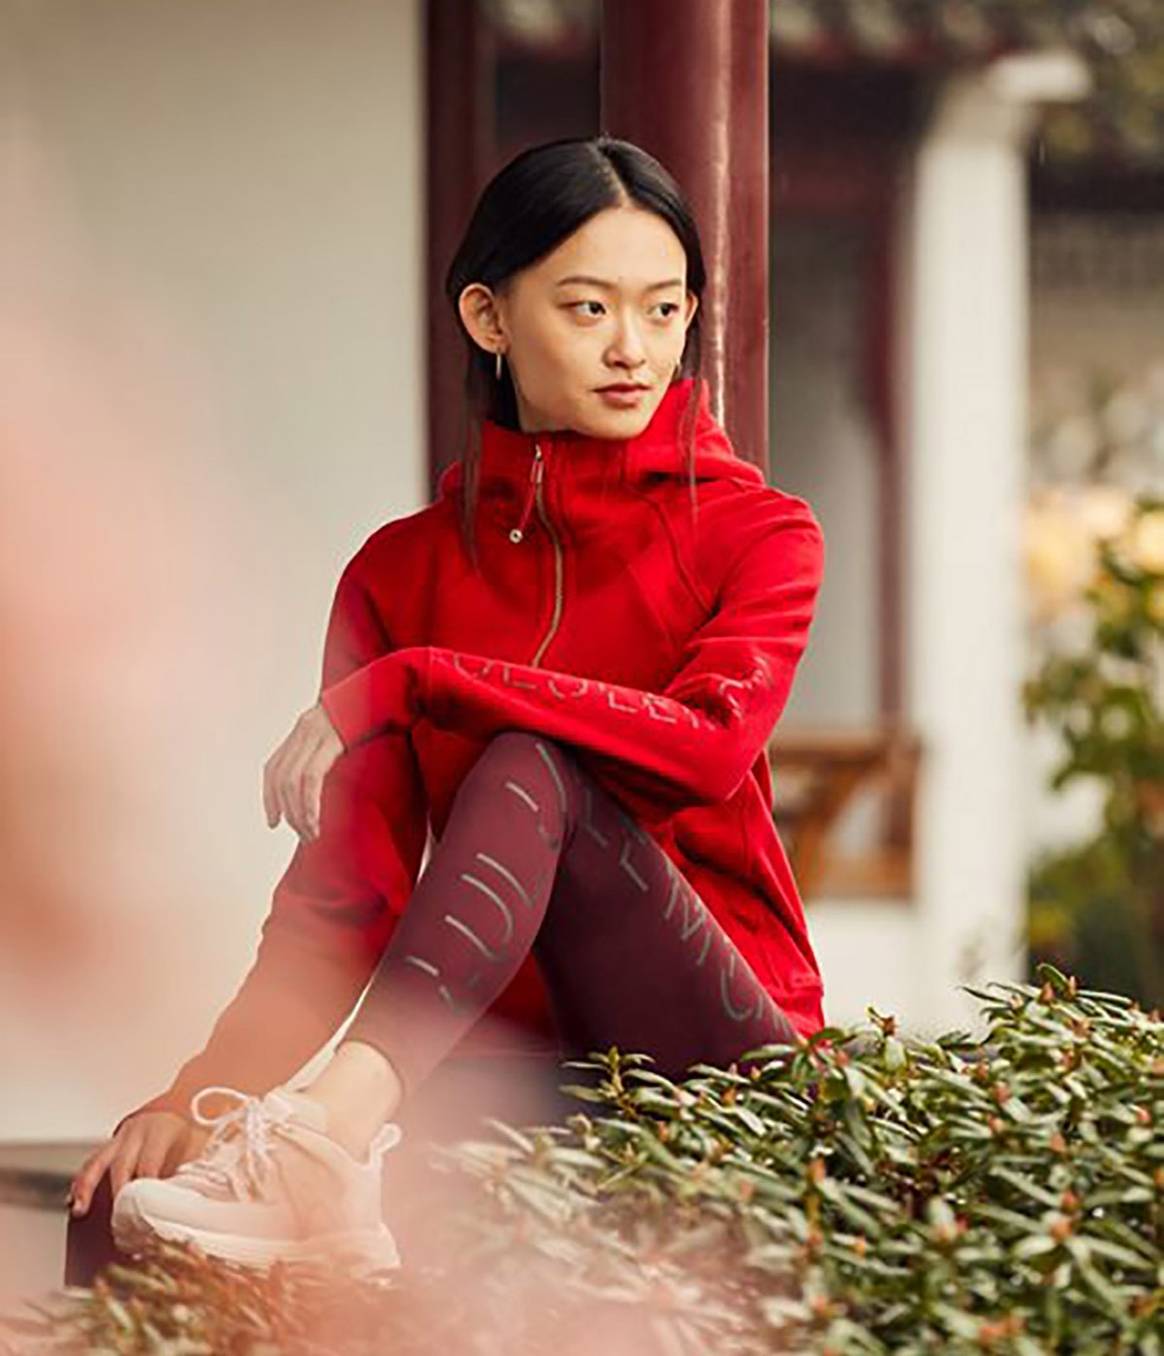 lululemon launches a Lunar New Year capsule collection with a